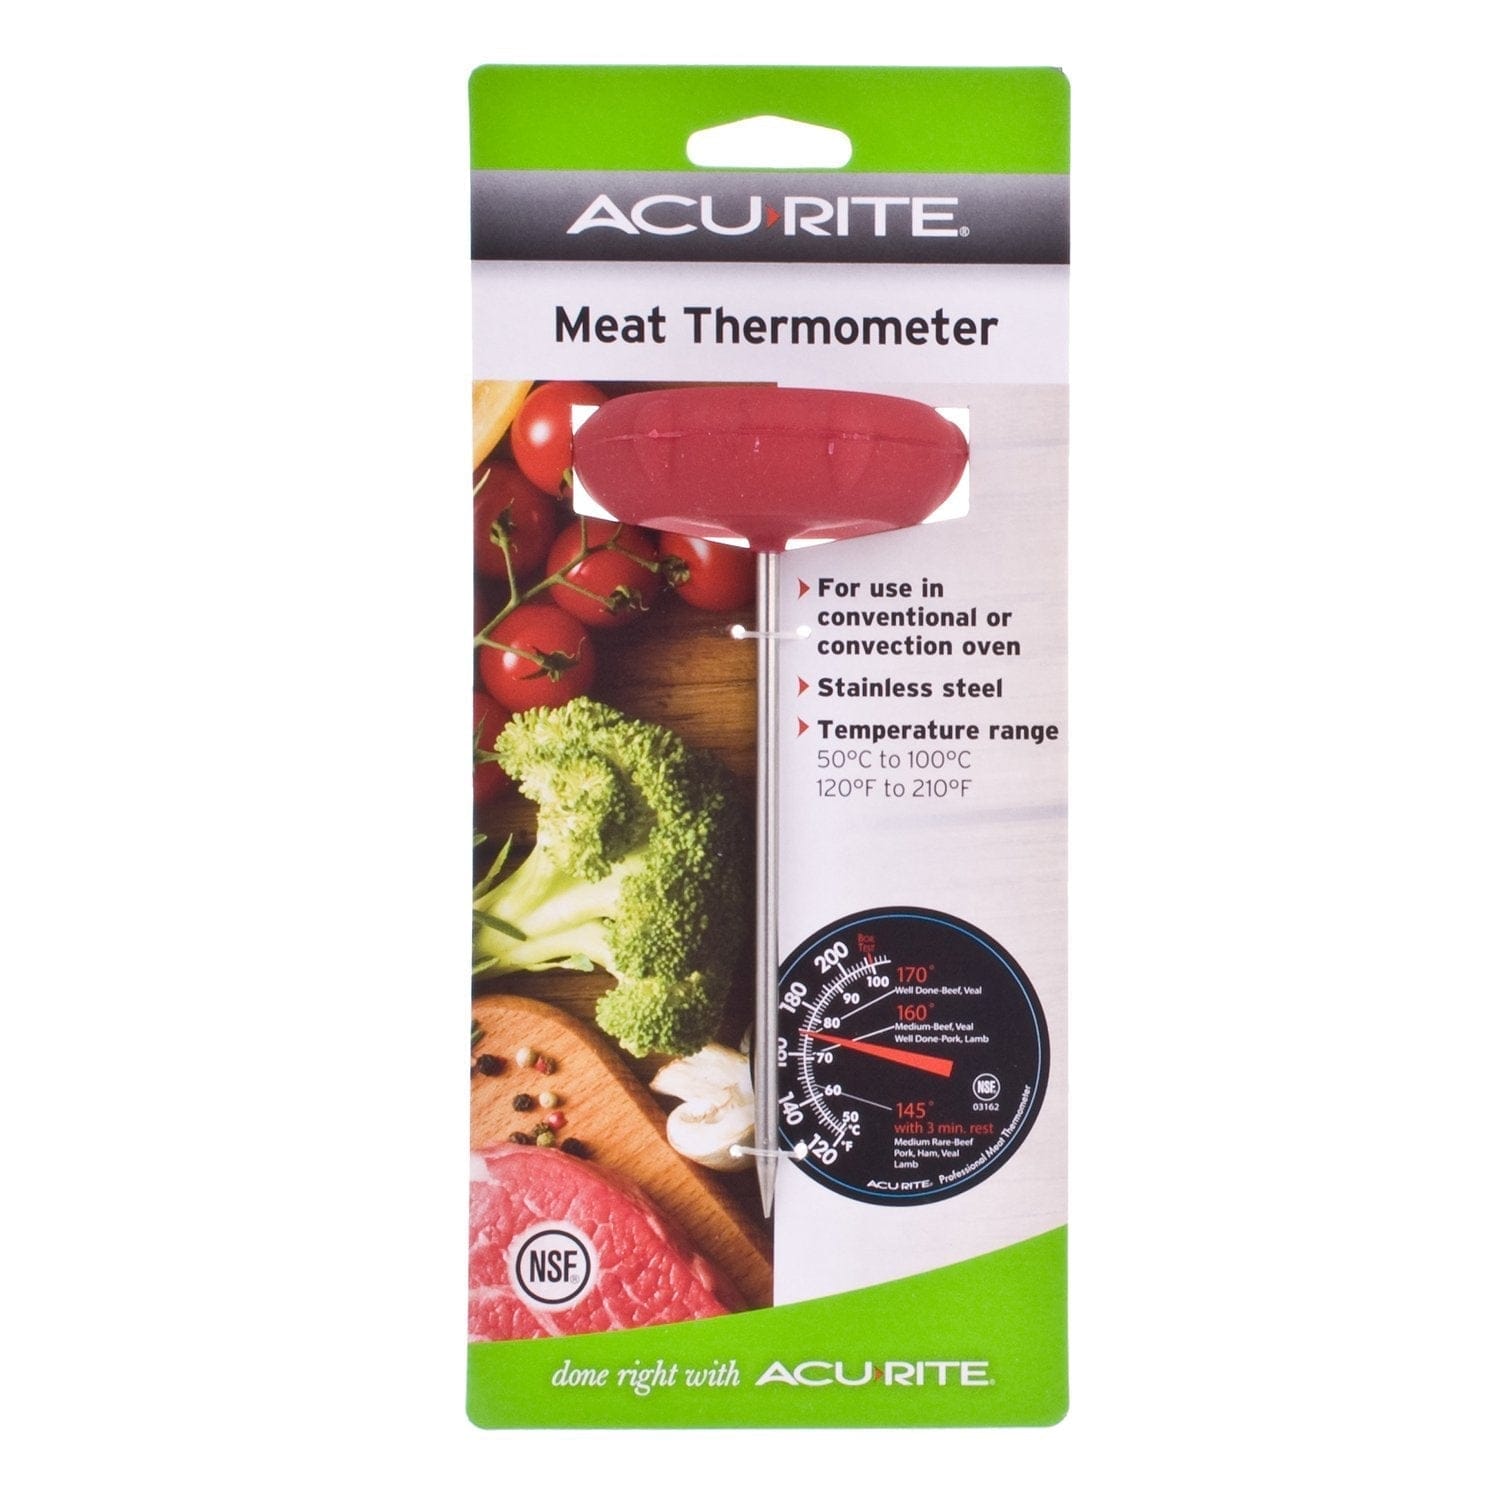 https://cdn.shopify.com/s/files/1/0672/1054/3353/products/acurite-thermometers-acurite-silicone-dial-meat-thermometer-38034176966905.jpg?v=1669640952&width=1500